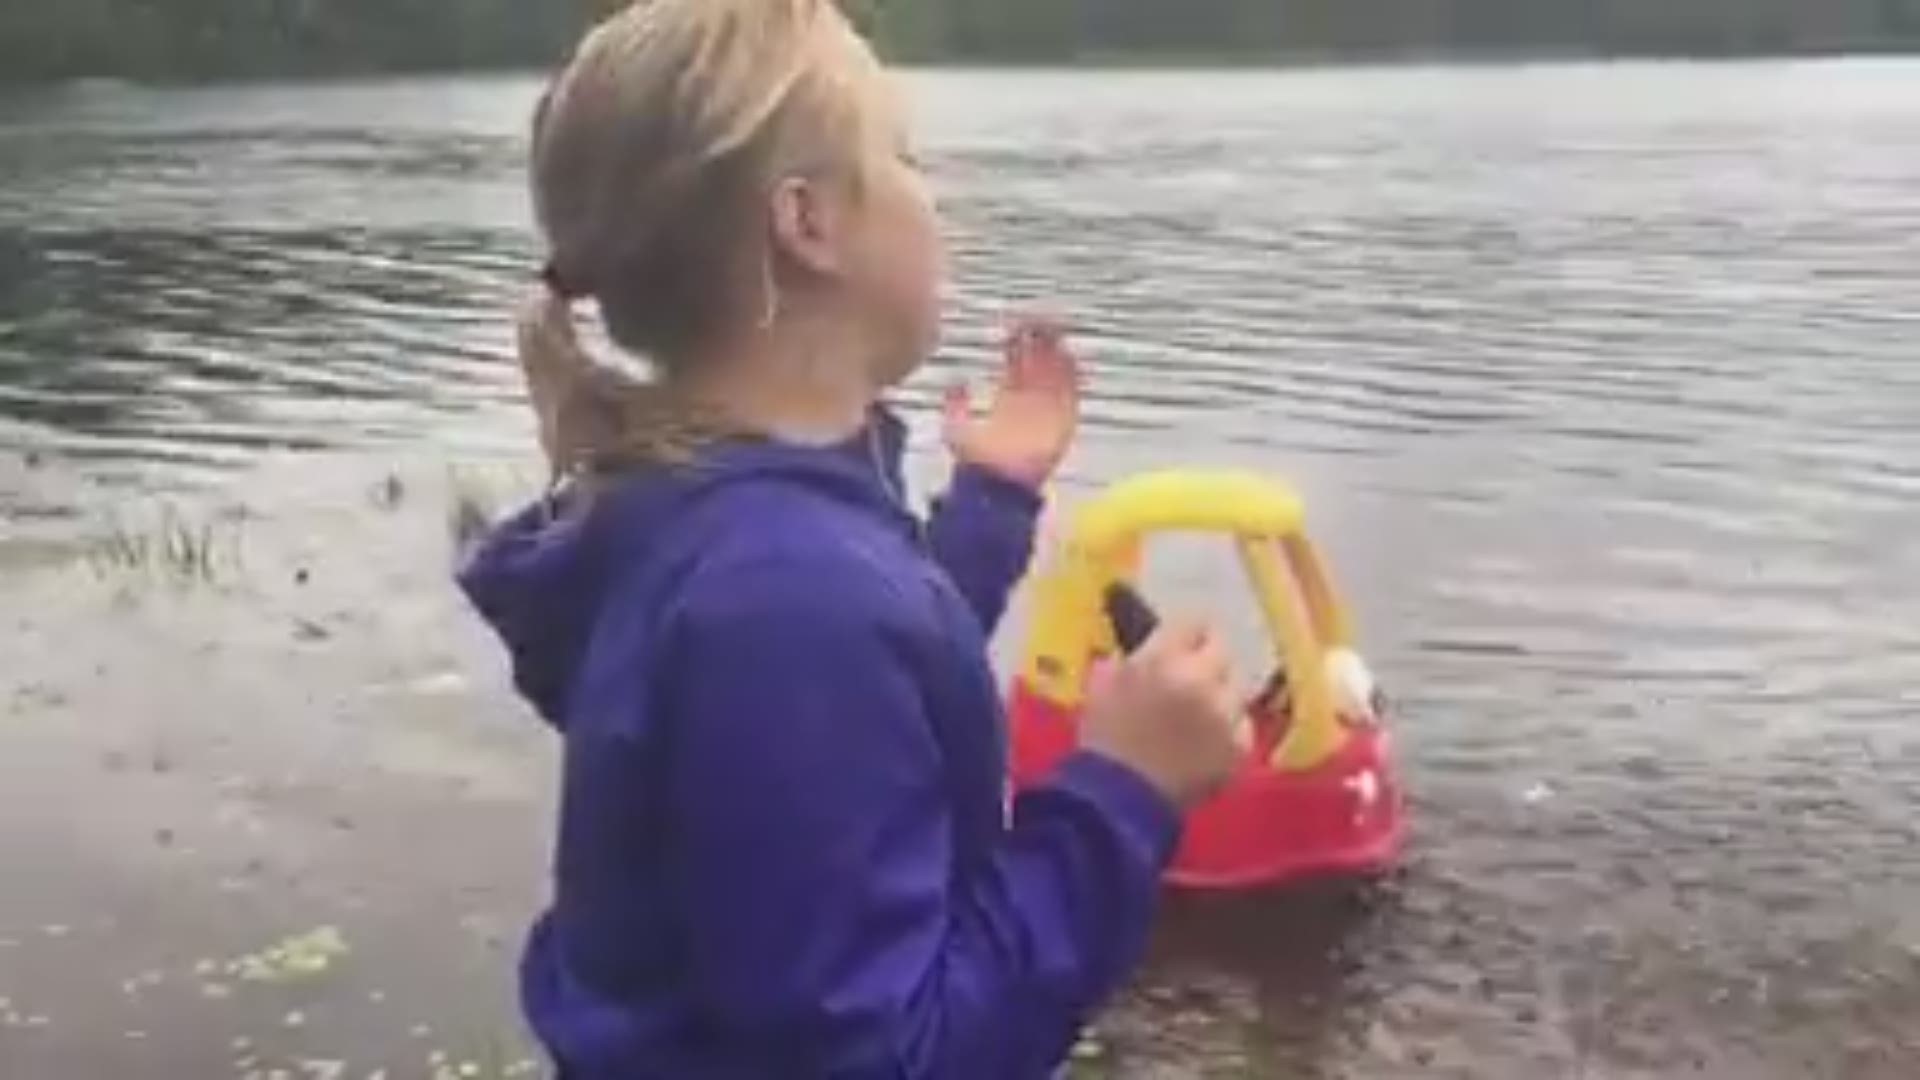 Some kids in Hartsville, South Carolina recreated #JeepWatch that happened in Myrtle Beach earlier in the day. Video courtesy of Chrissie Wine-Thomas.